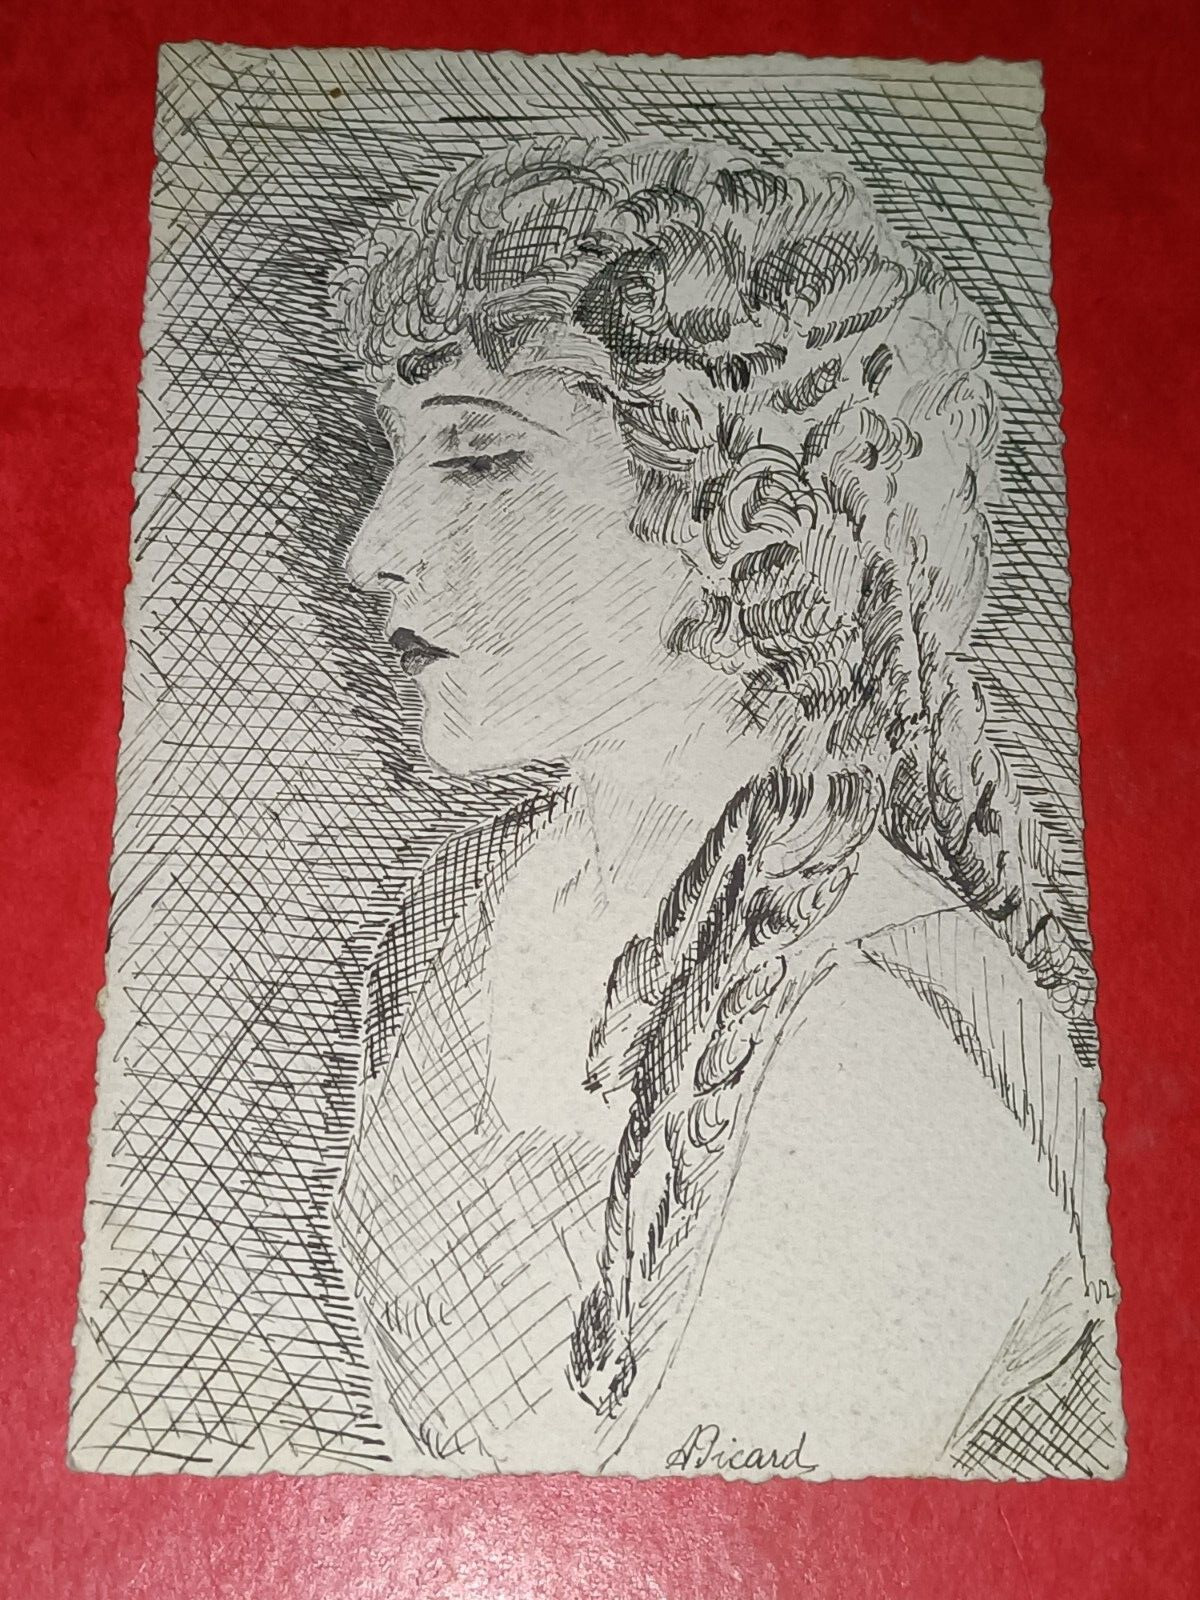 CPA PORTRAIT LE HAVRE Theatre - Raised Hand Drawing - Alicard - MARY PICKFORD